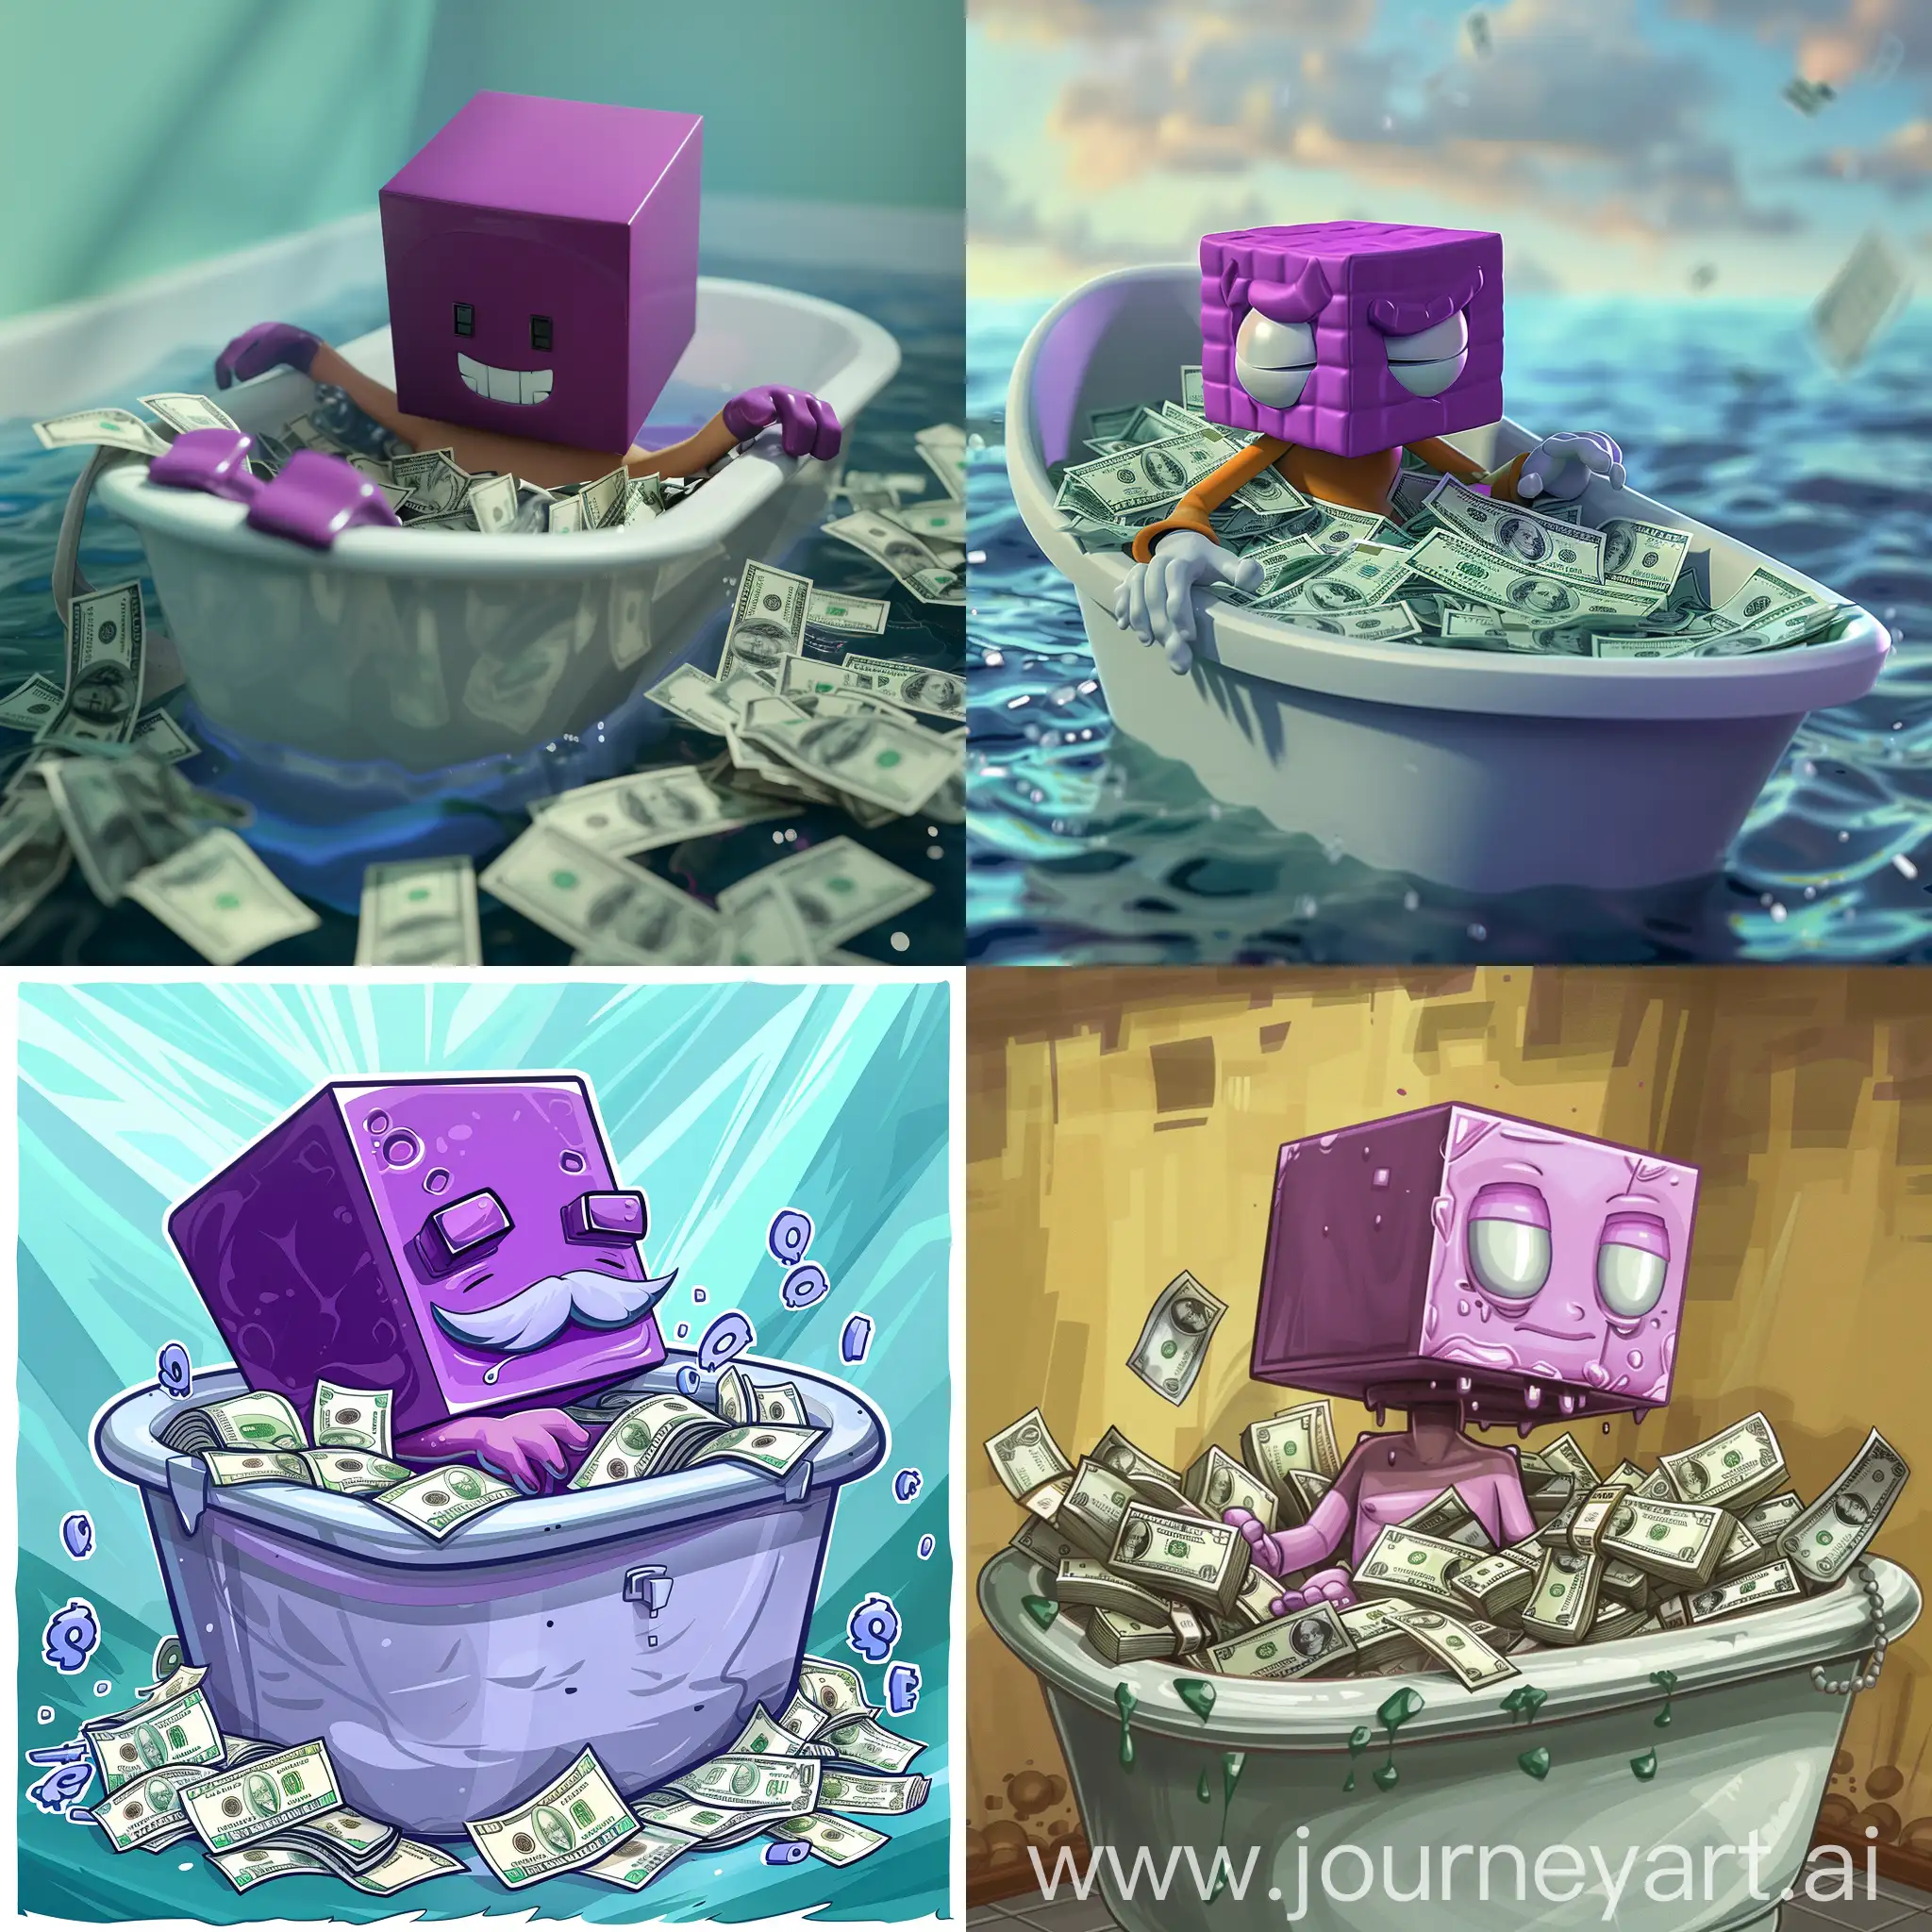 A character with a purple cube head seat in a bath tube full of dollars 